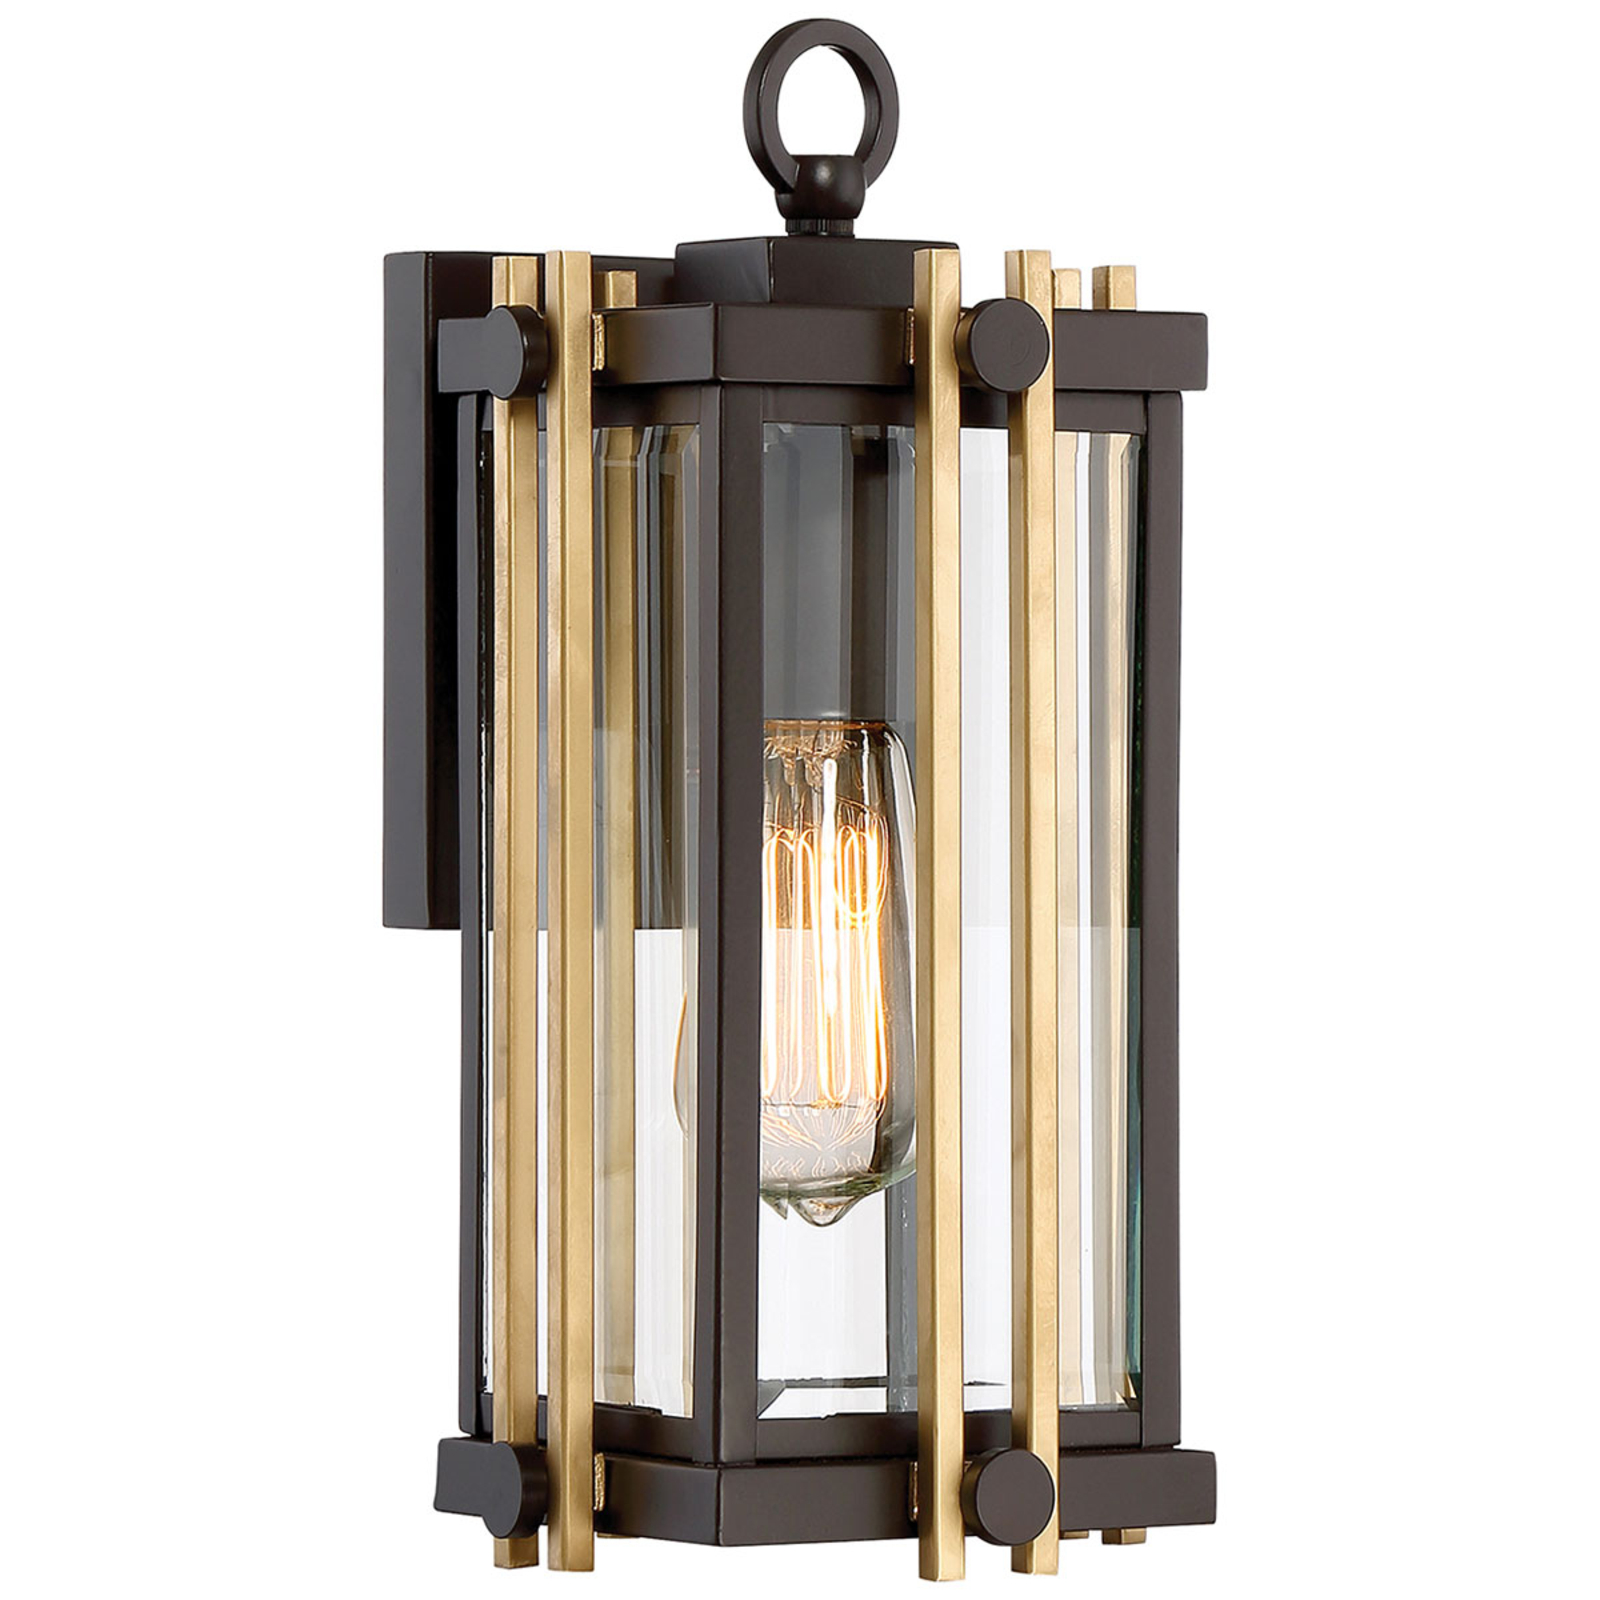 Goldenrod small outdoor wall light 32.4 cm